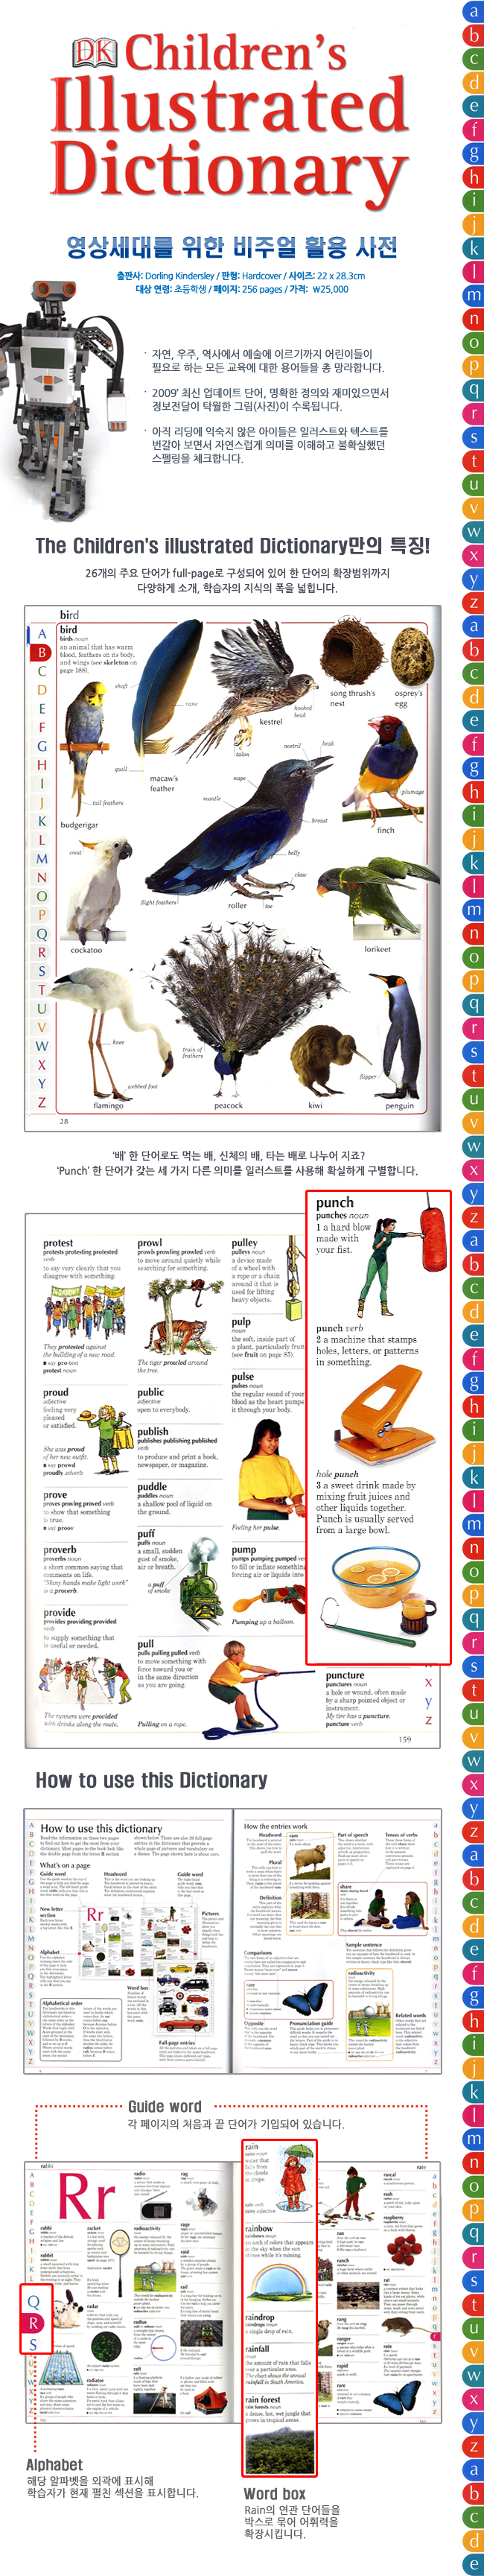 PP-The DK Childrens illustrated Dictionary_New.jpg